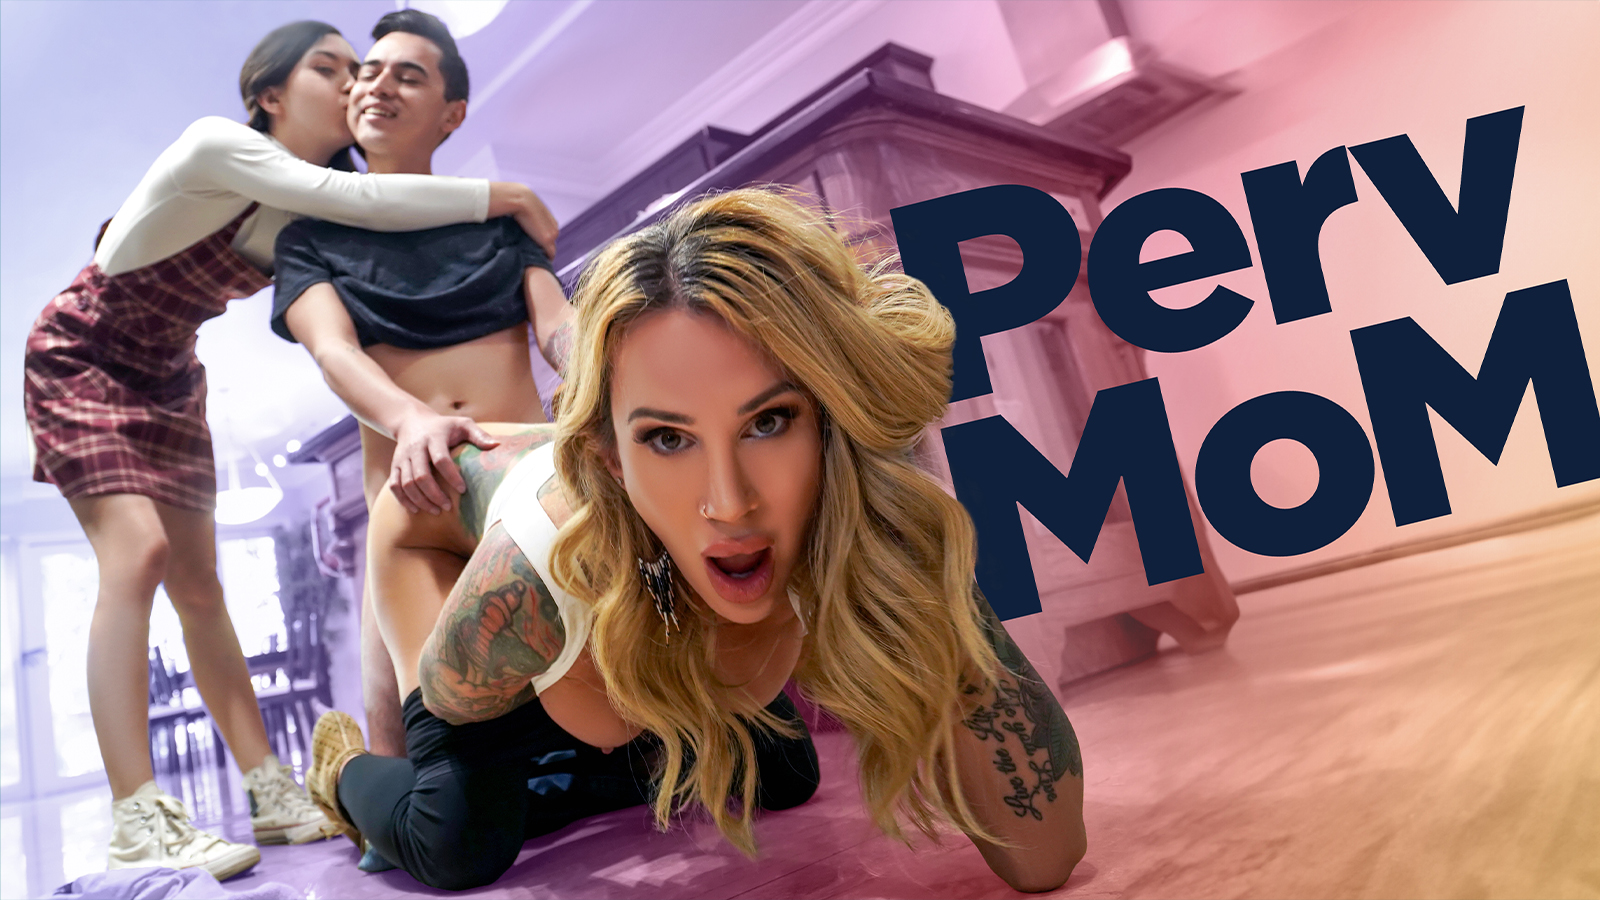 [PervMom] Sarah Jessie, Amber Angel (Sex Can Make Things Even)